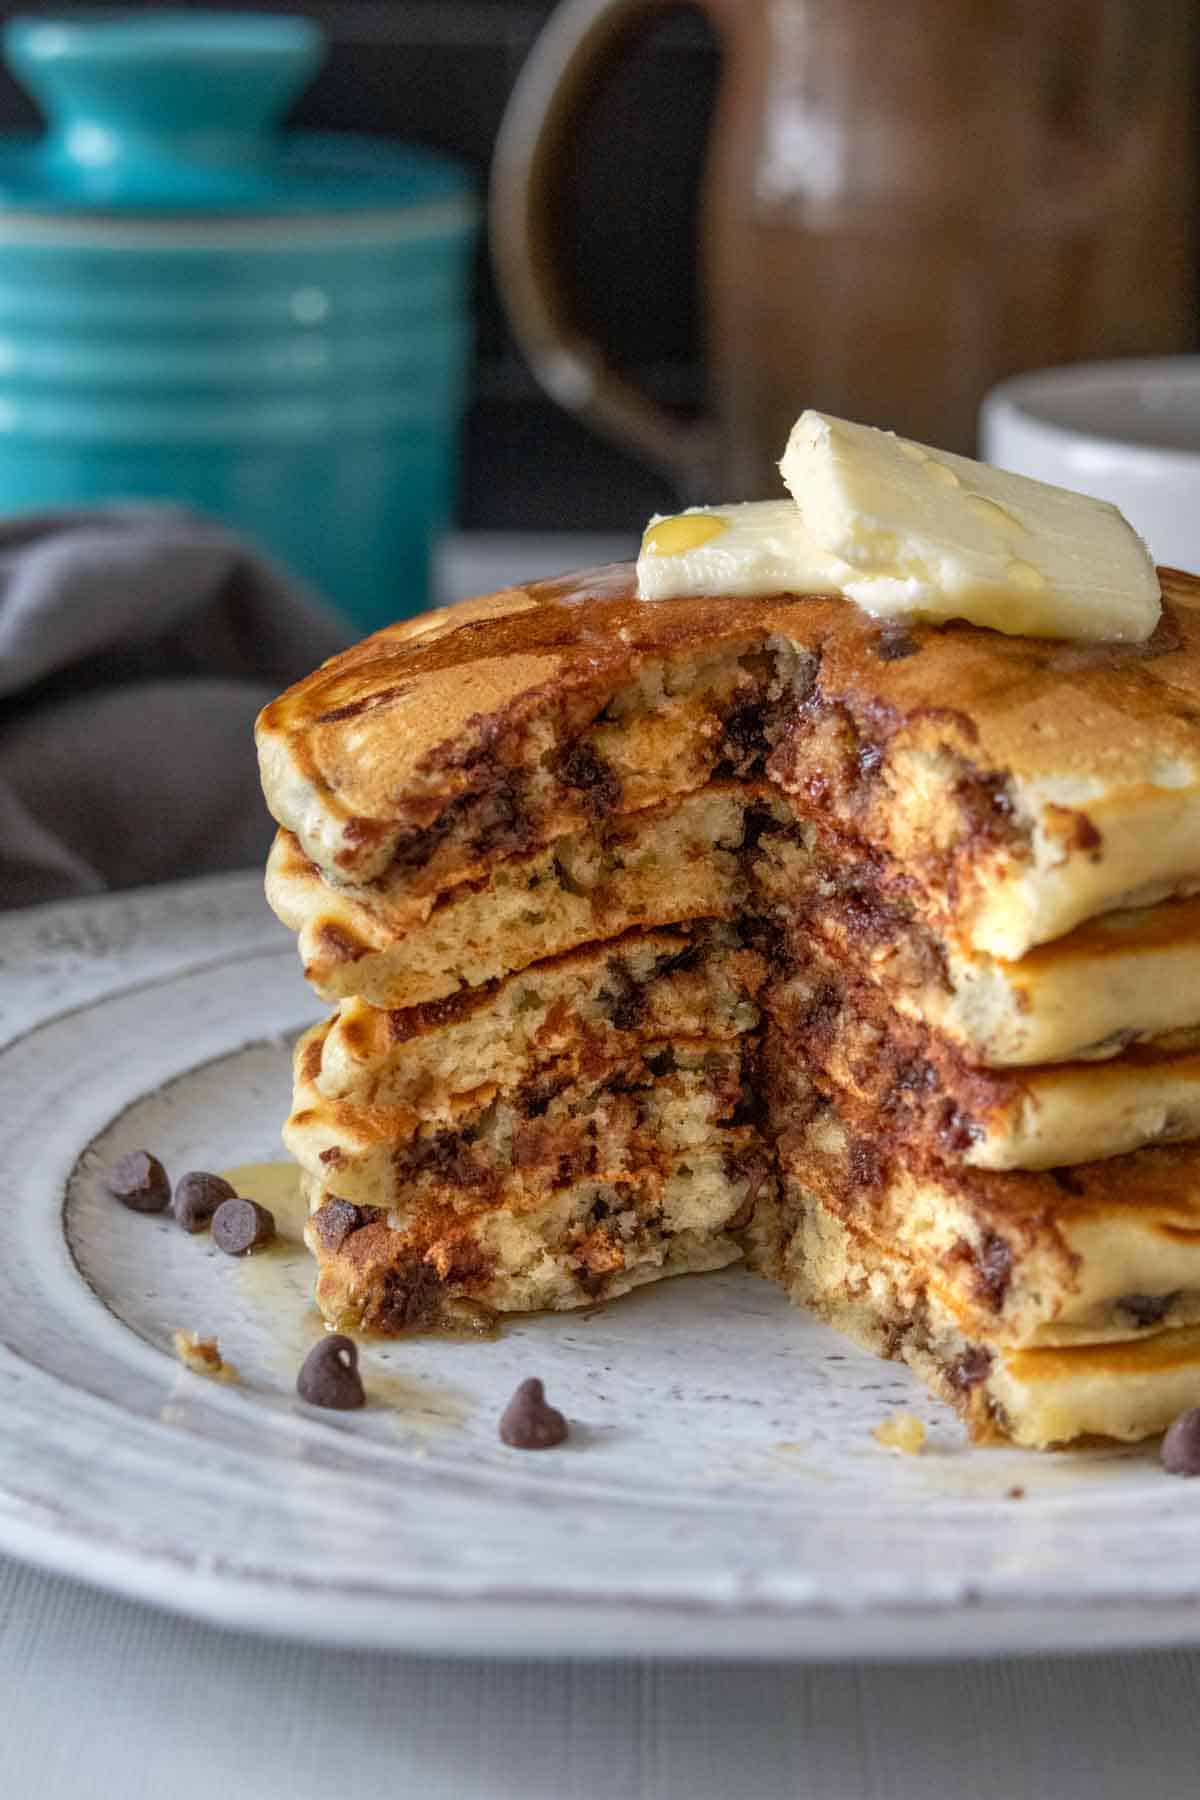 Stack of chocolate chip pancakes with a wedge cut out so the interior is seen.